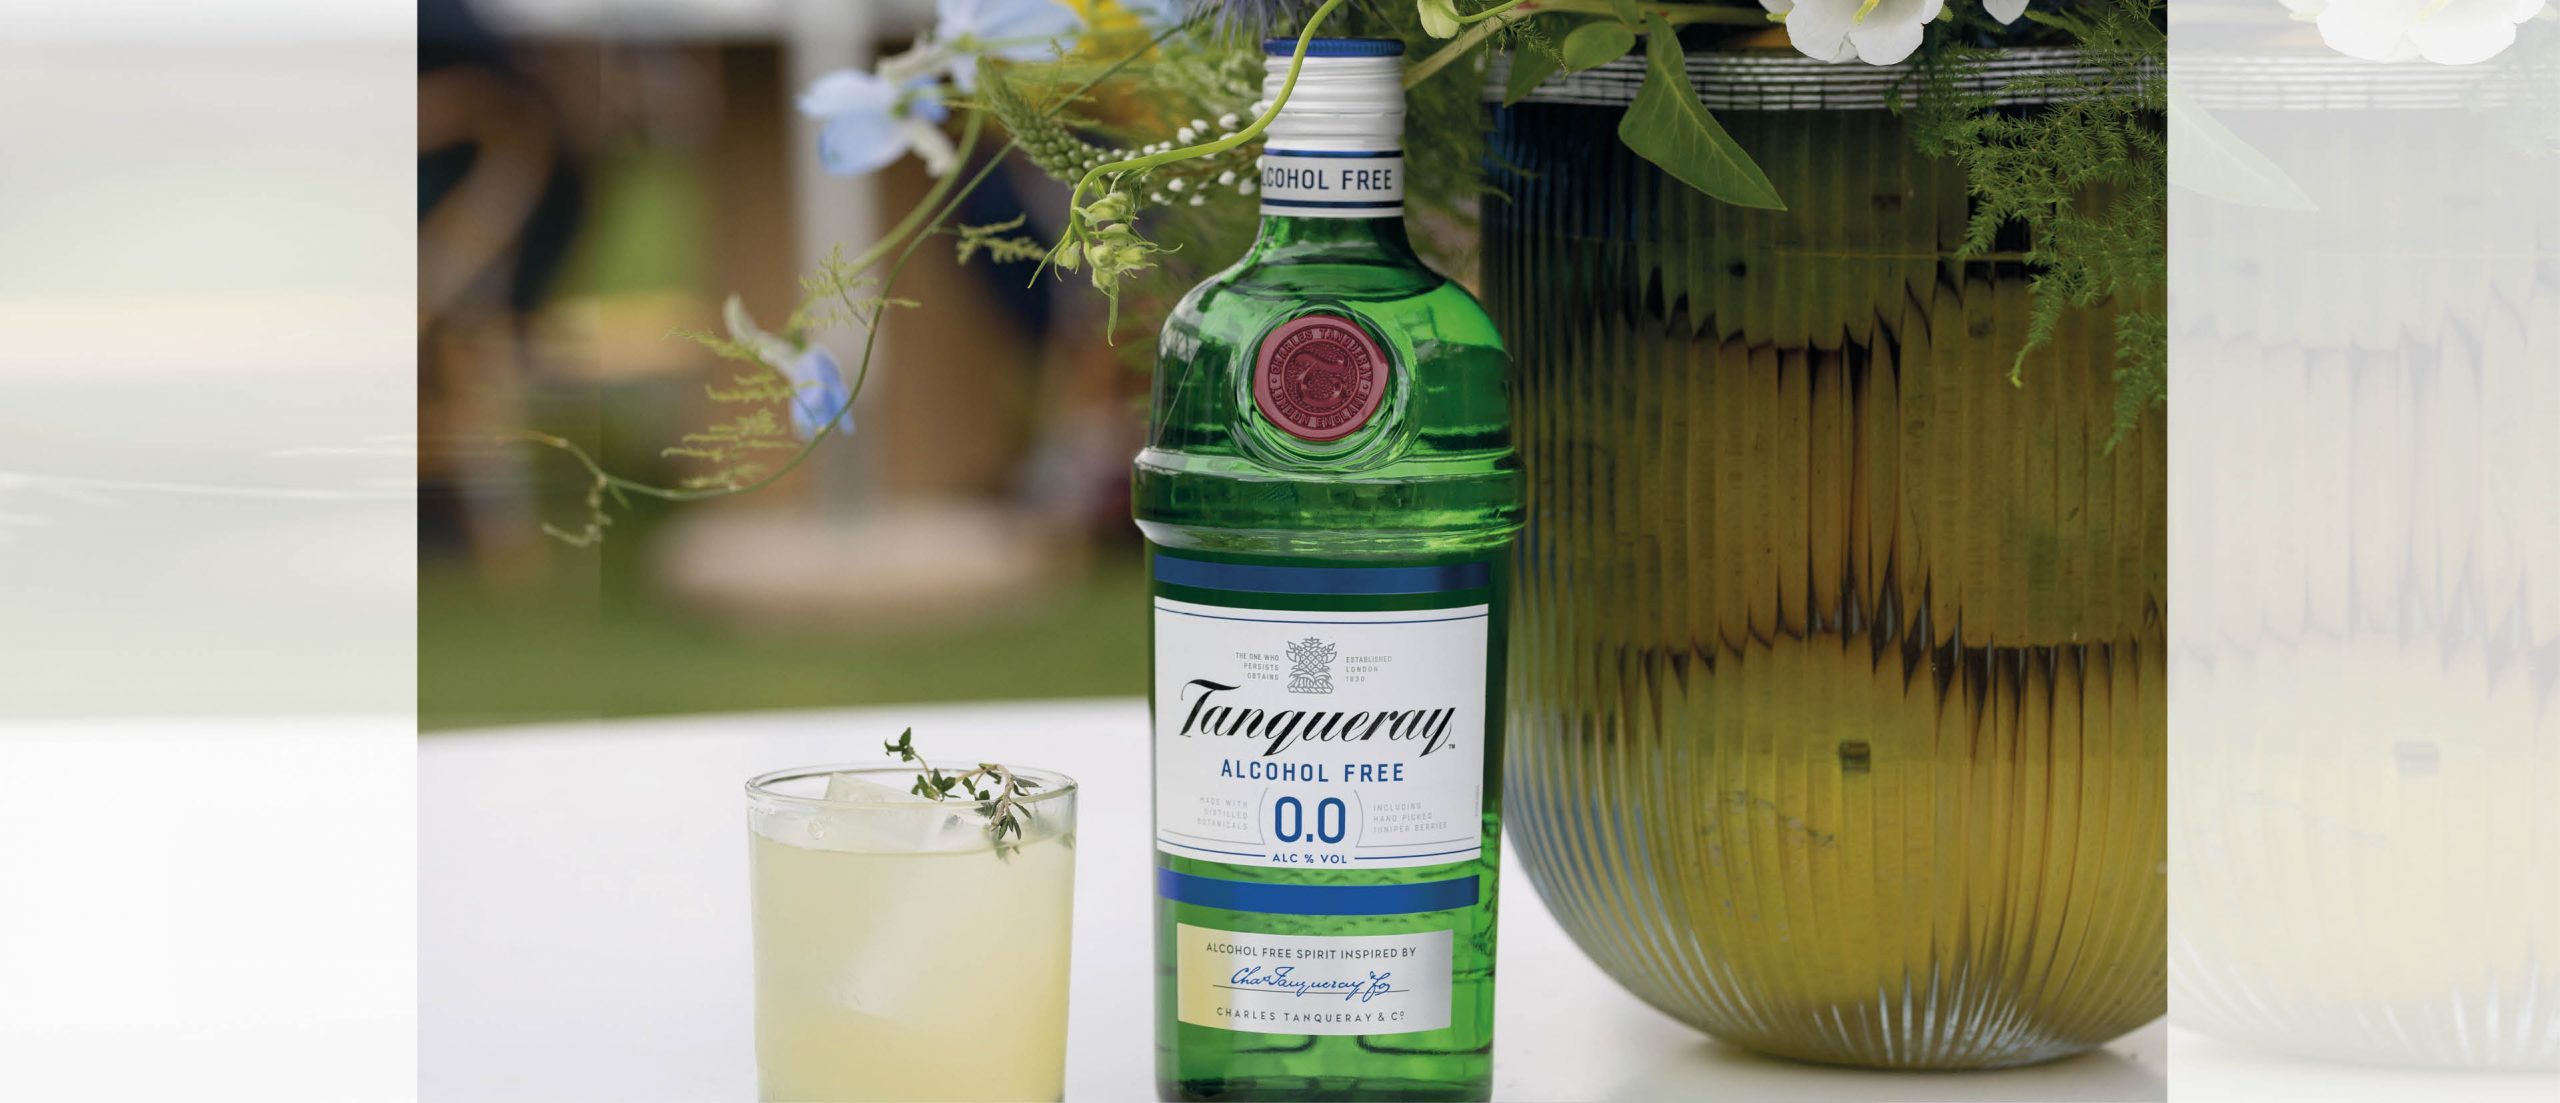 - It Magazine Get alcohol-free Tanqueray Worry-free,